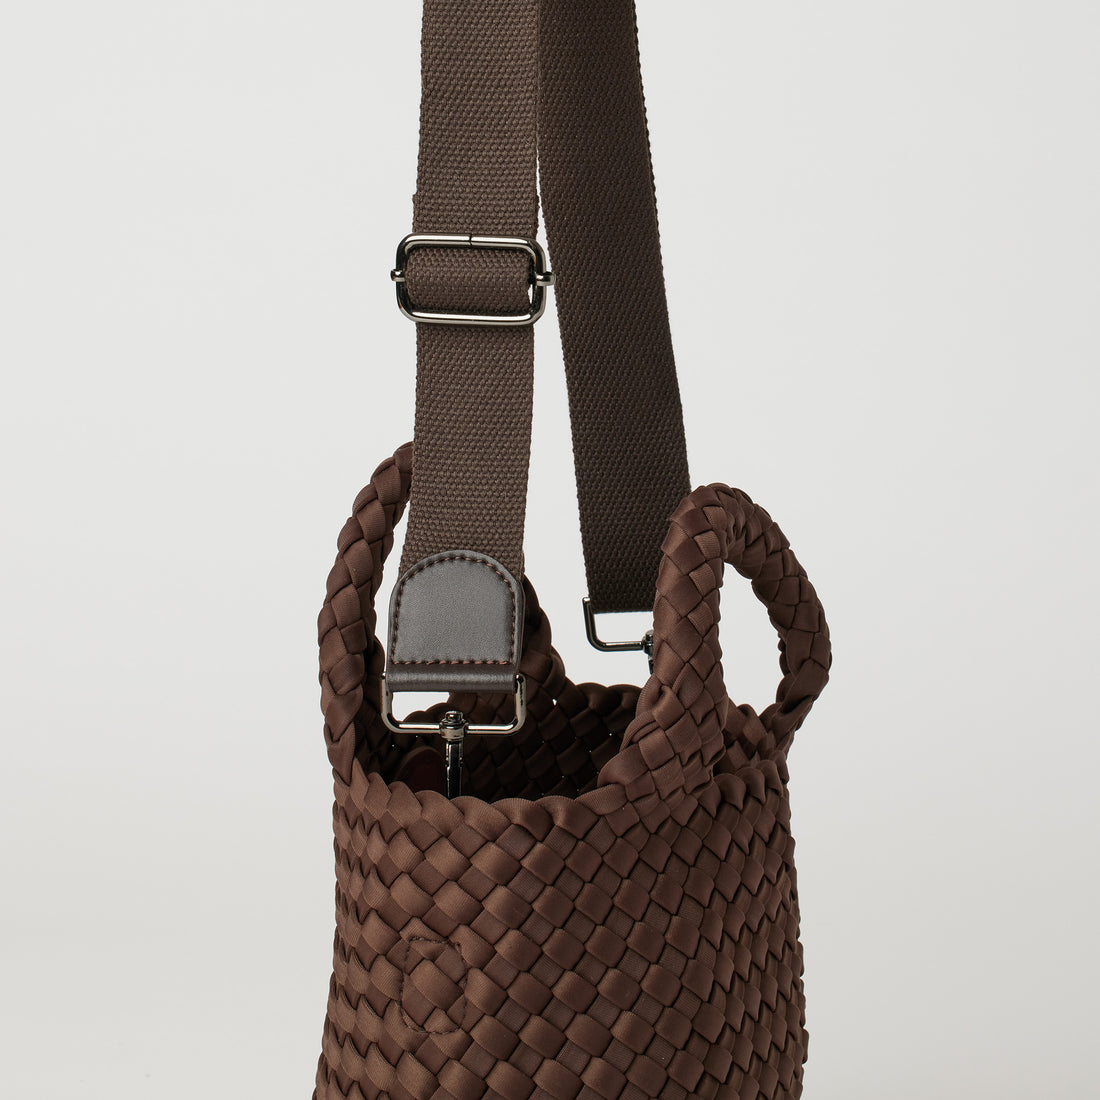 Andreina Bags Lupe crossbody bag in brown colour. small size yet roomy. Handmade, interlaced material, synthetic material, water resistant, machine washable, adjustable strap, lightweight. Can be worn as crossbody or as a handbag. Designed in Sydney, Australia.